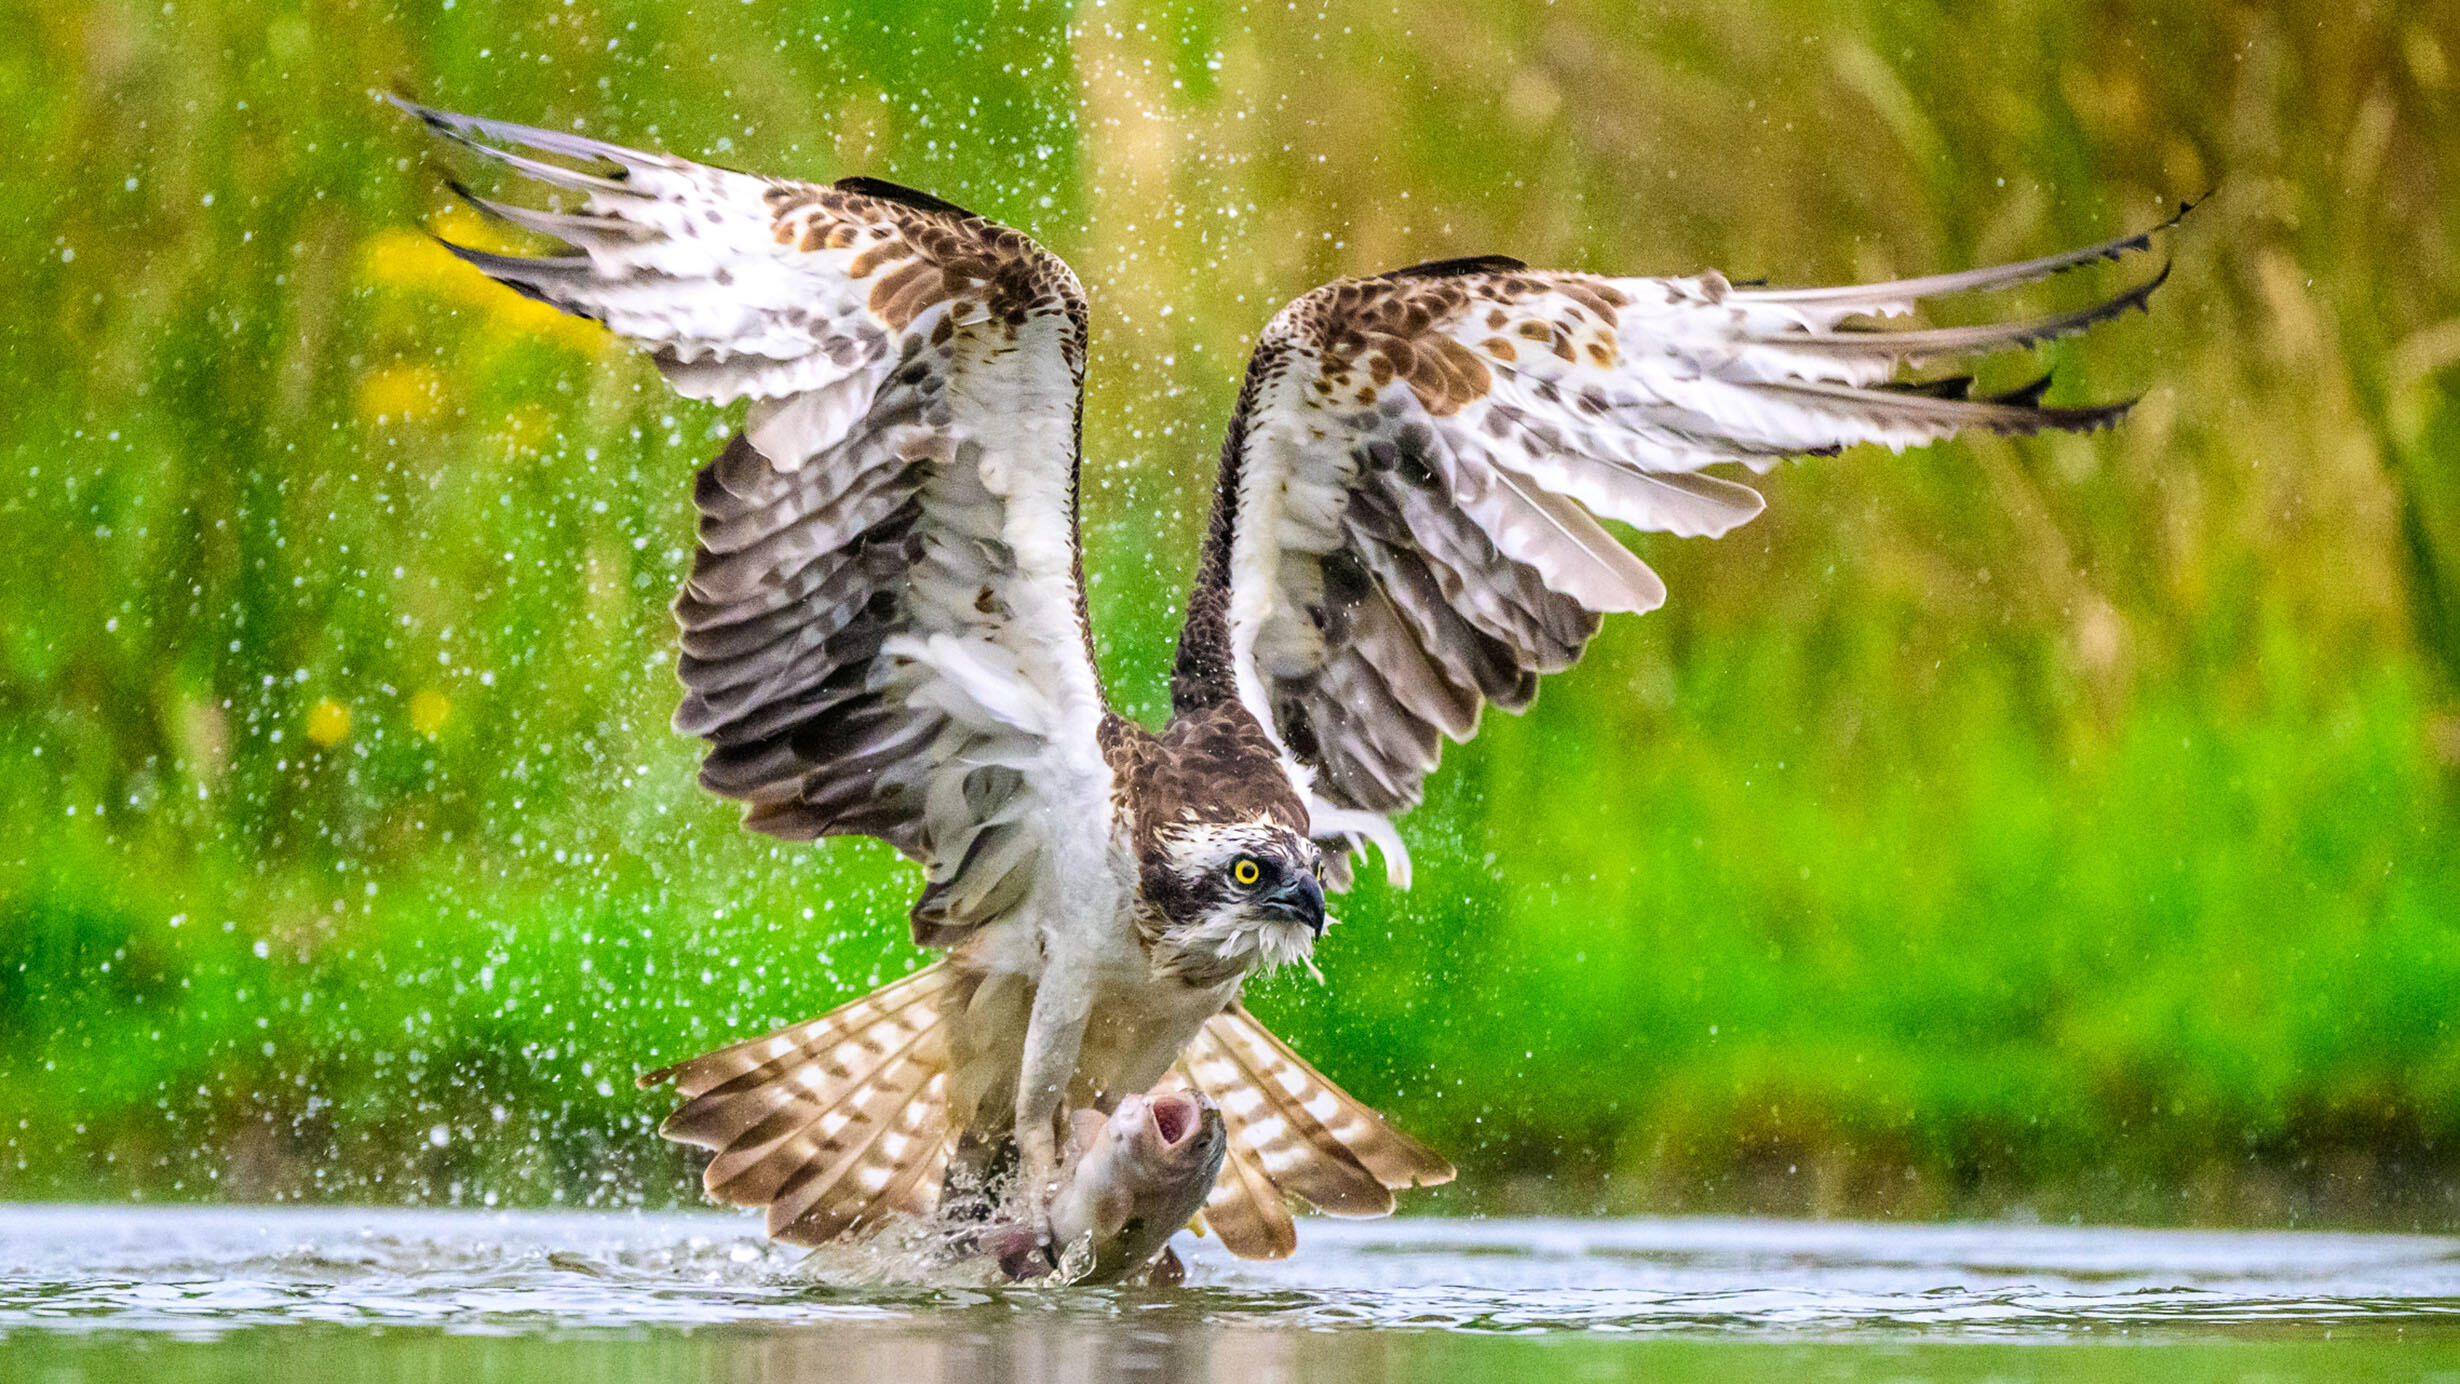 An osprey with its large wings outspread snatching a fish out of water with its talons. 